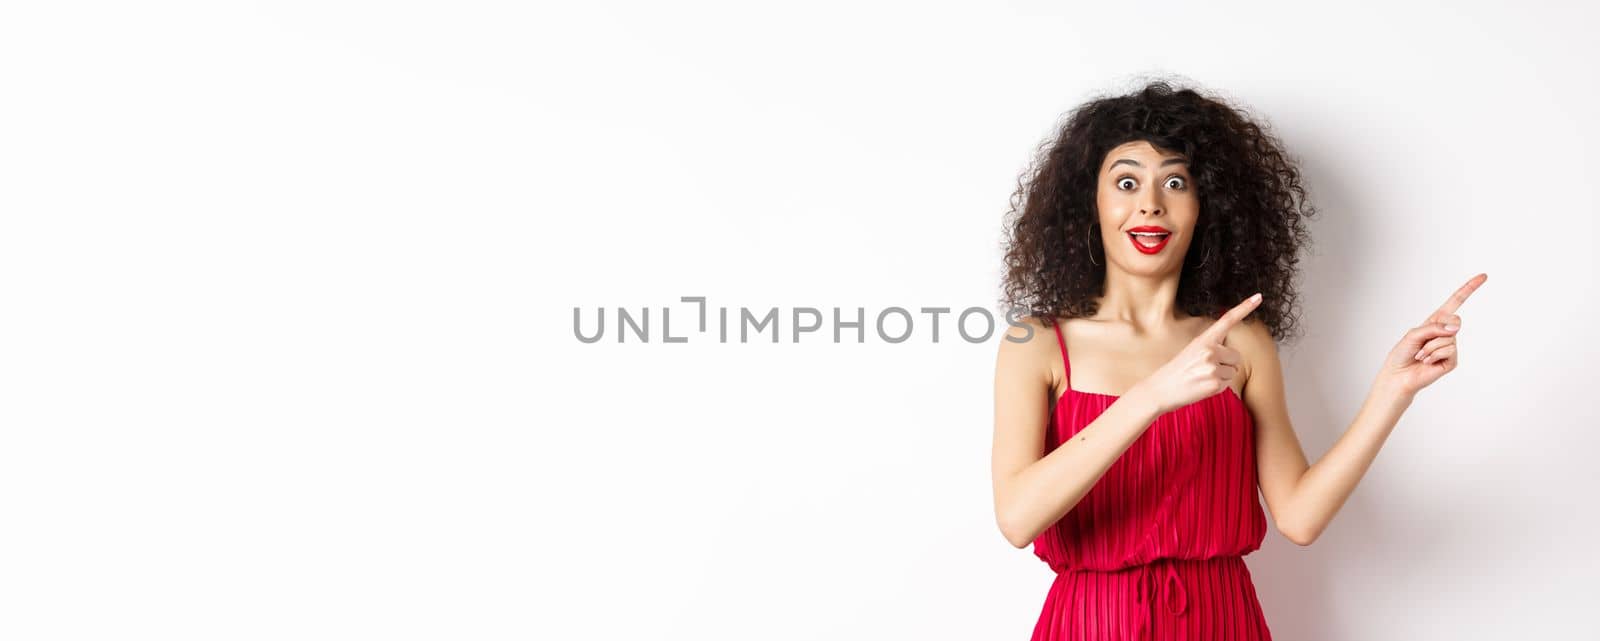 Surprised woman with curly hair, makeup and red dress, looking amazed and happy while pointing fingers right at logo, showing advertisement, white background.